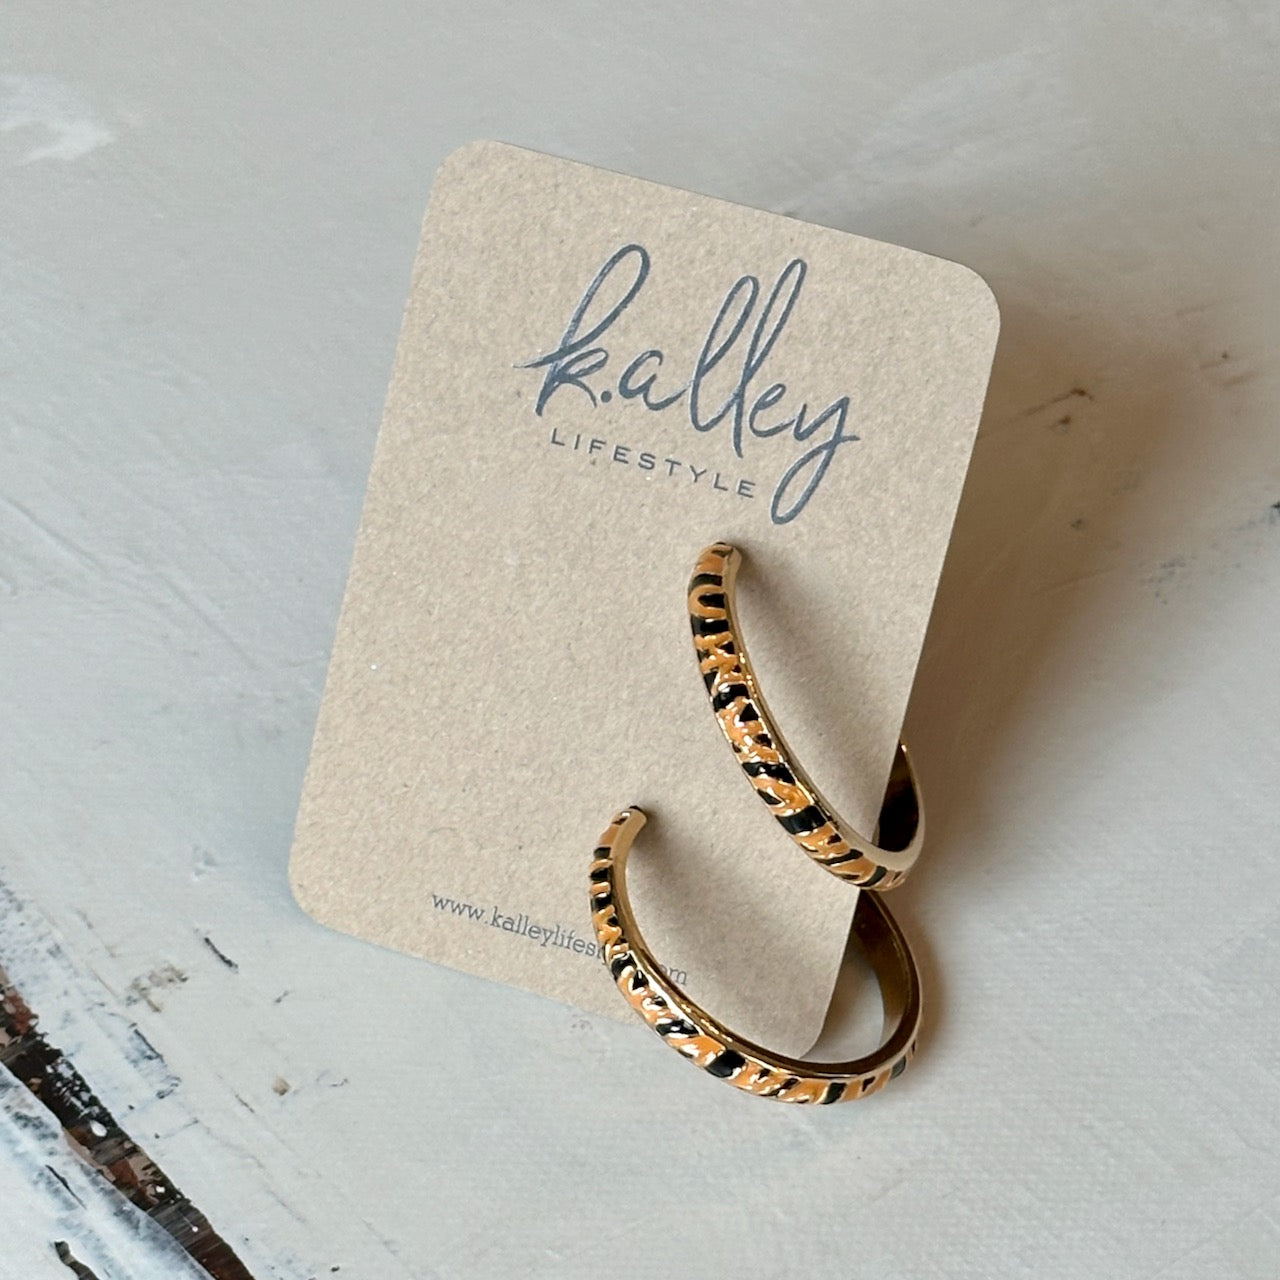 Traditional Tiger Print Gold Hoop Earrings (2 sizes)